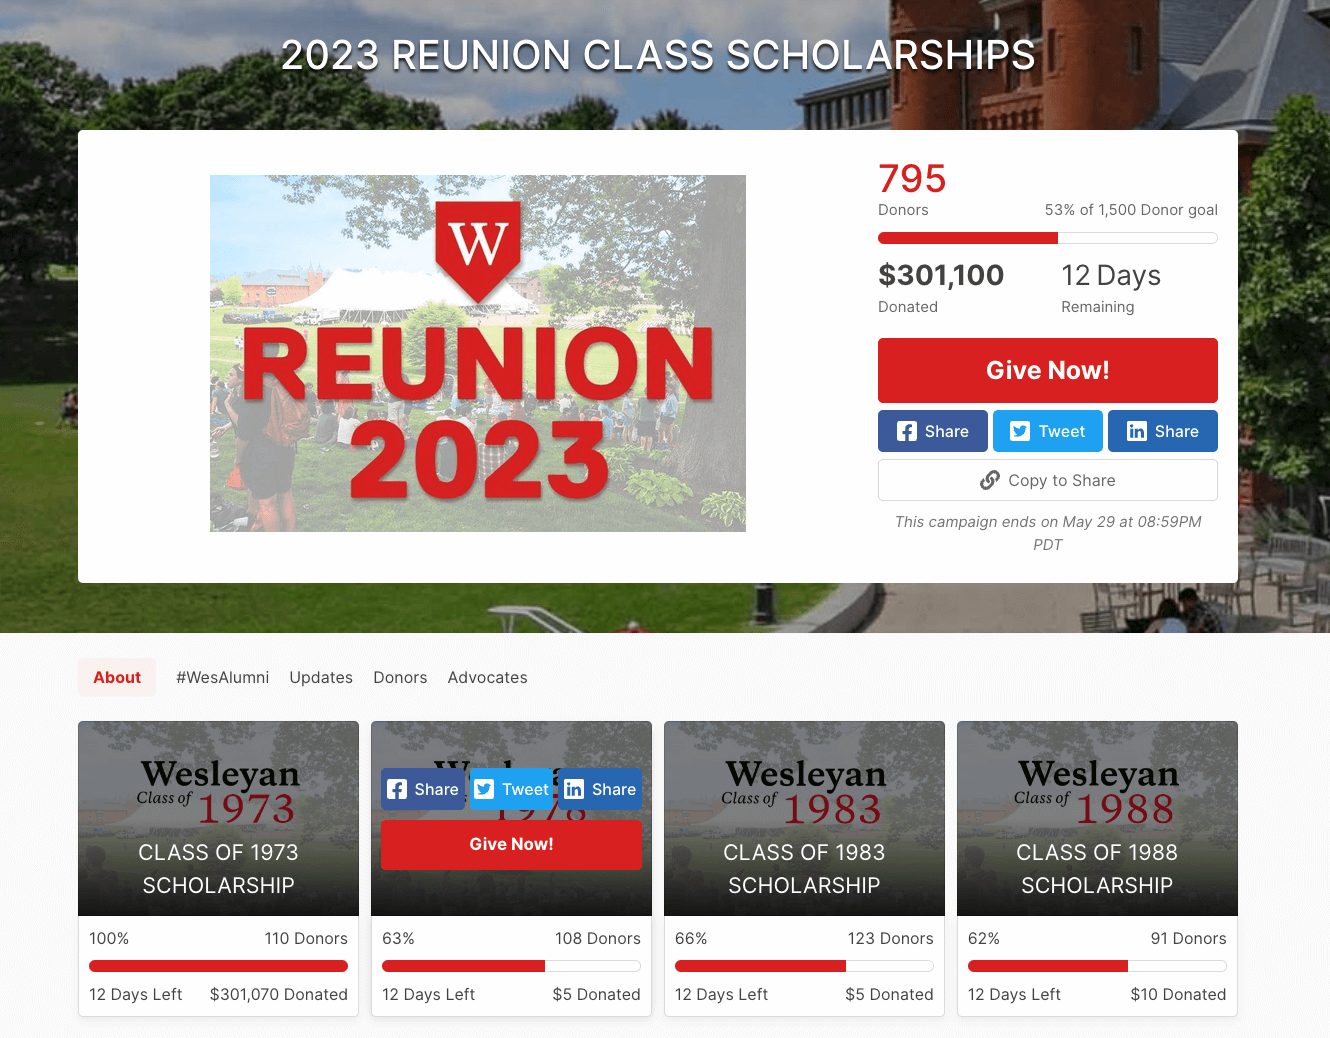 Online reunion fundraising campaign for 2023 at Wesleyan University